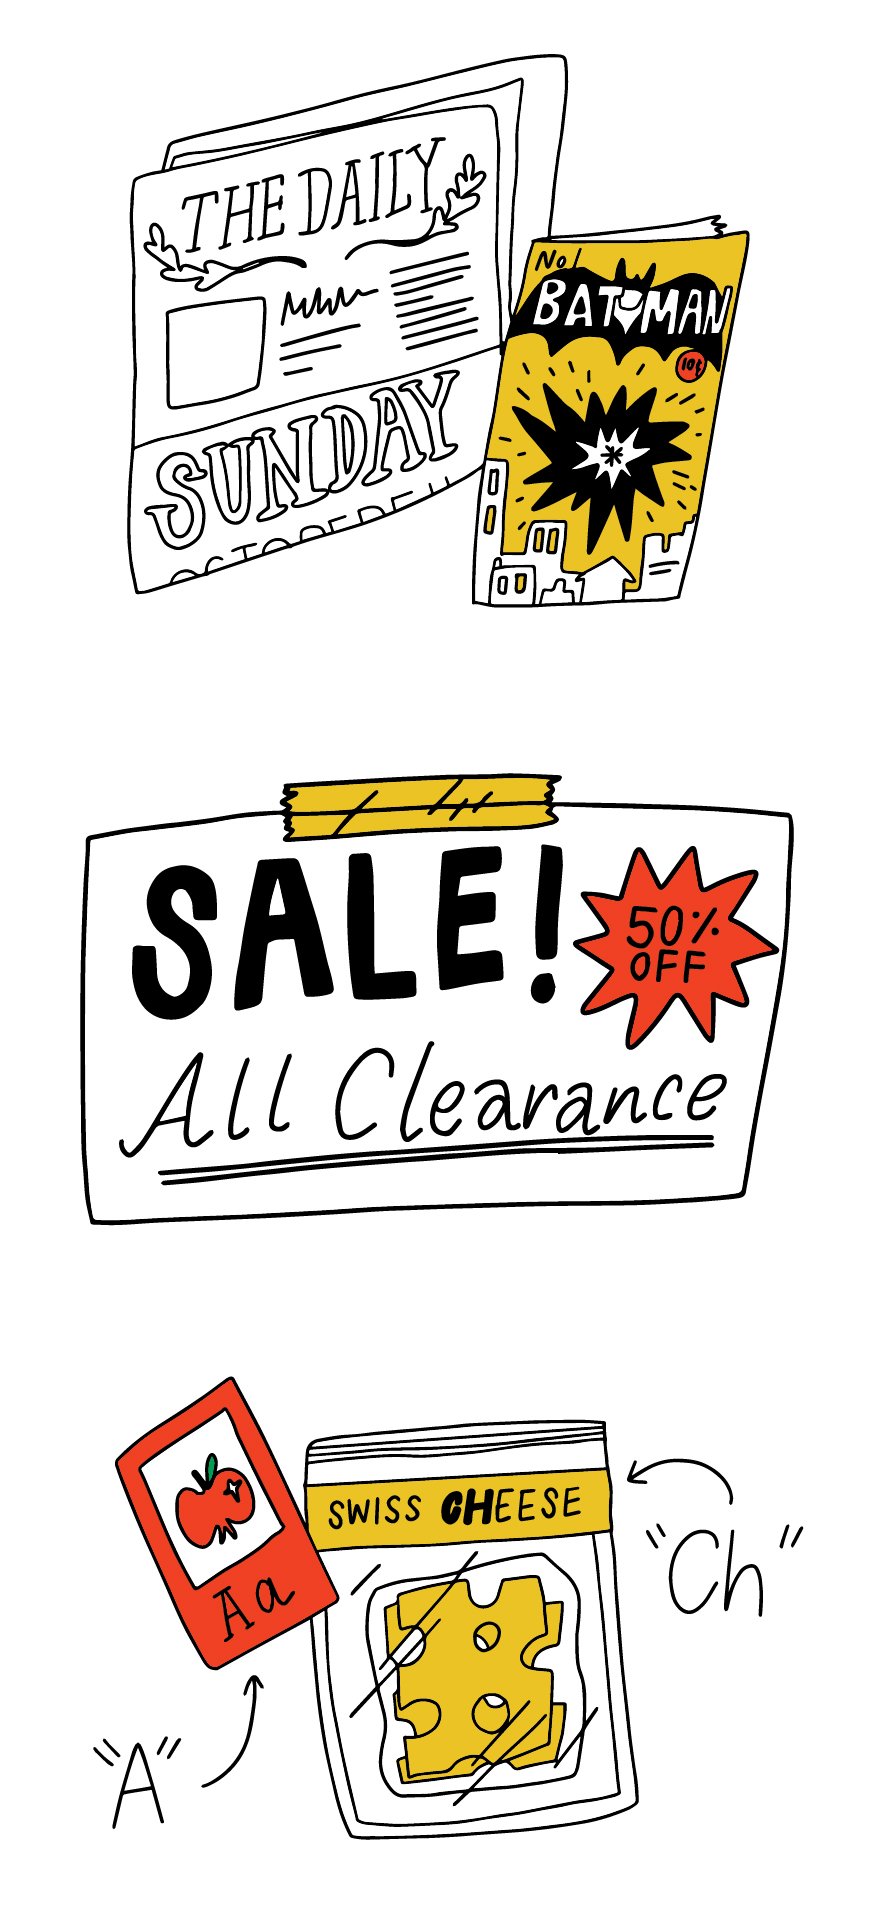 Illustrations of a newspaper, comic book, sale sign and food packaging